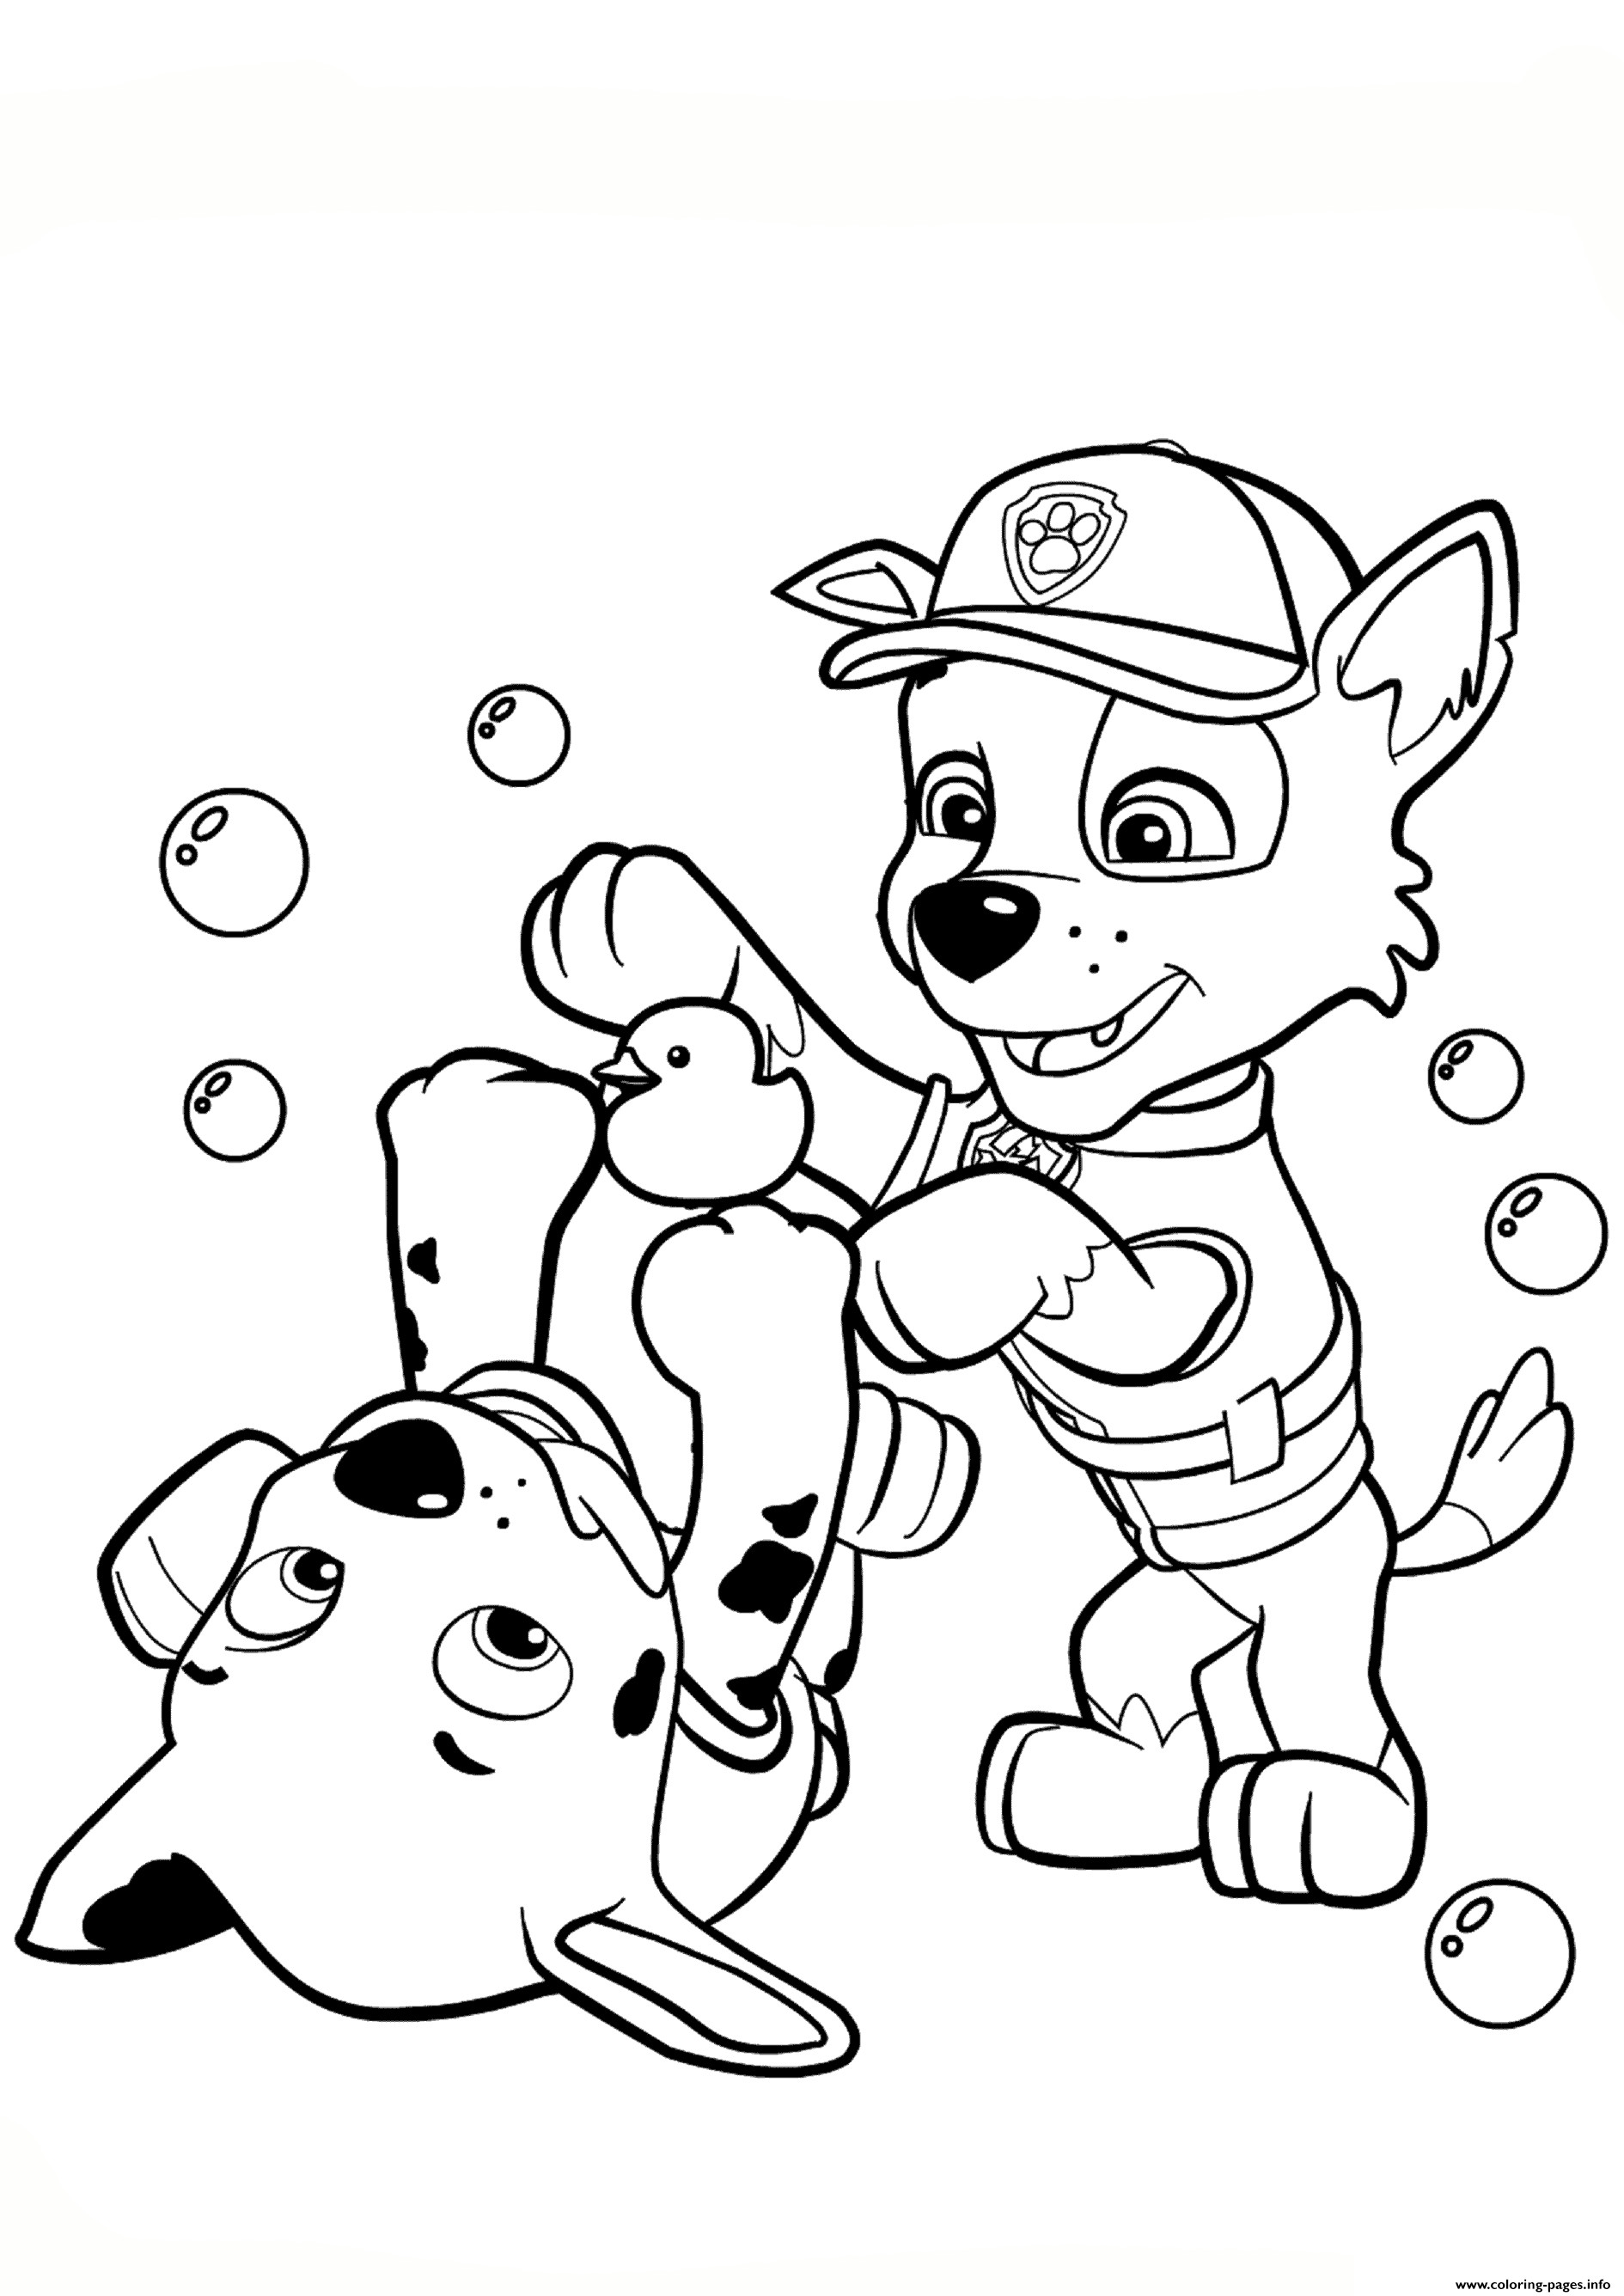 Coloring Pages Boys Paw Patrol Easter
 Print paw patrol rocky and marshall coloring pages